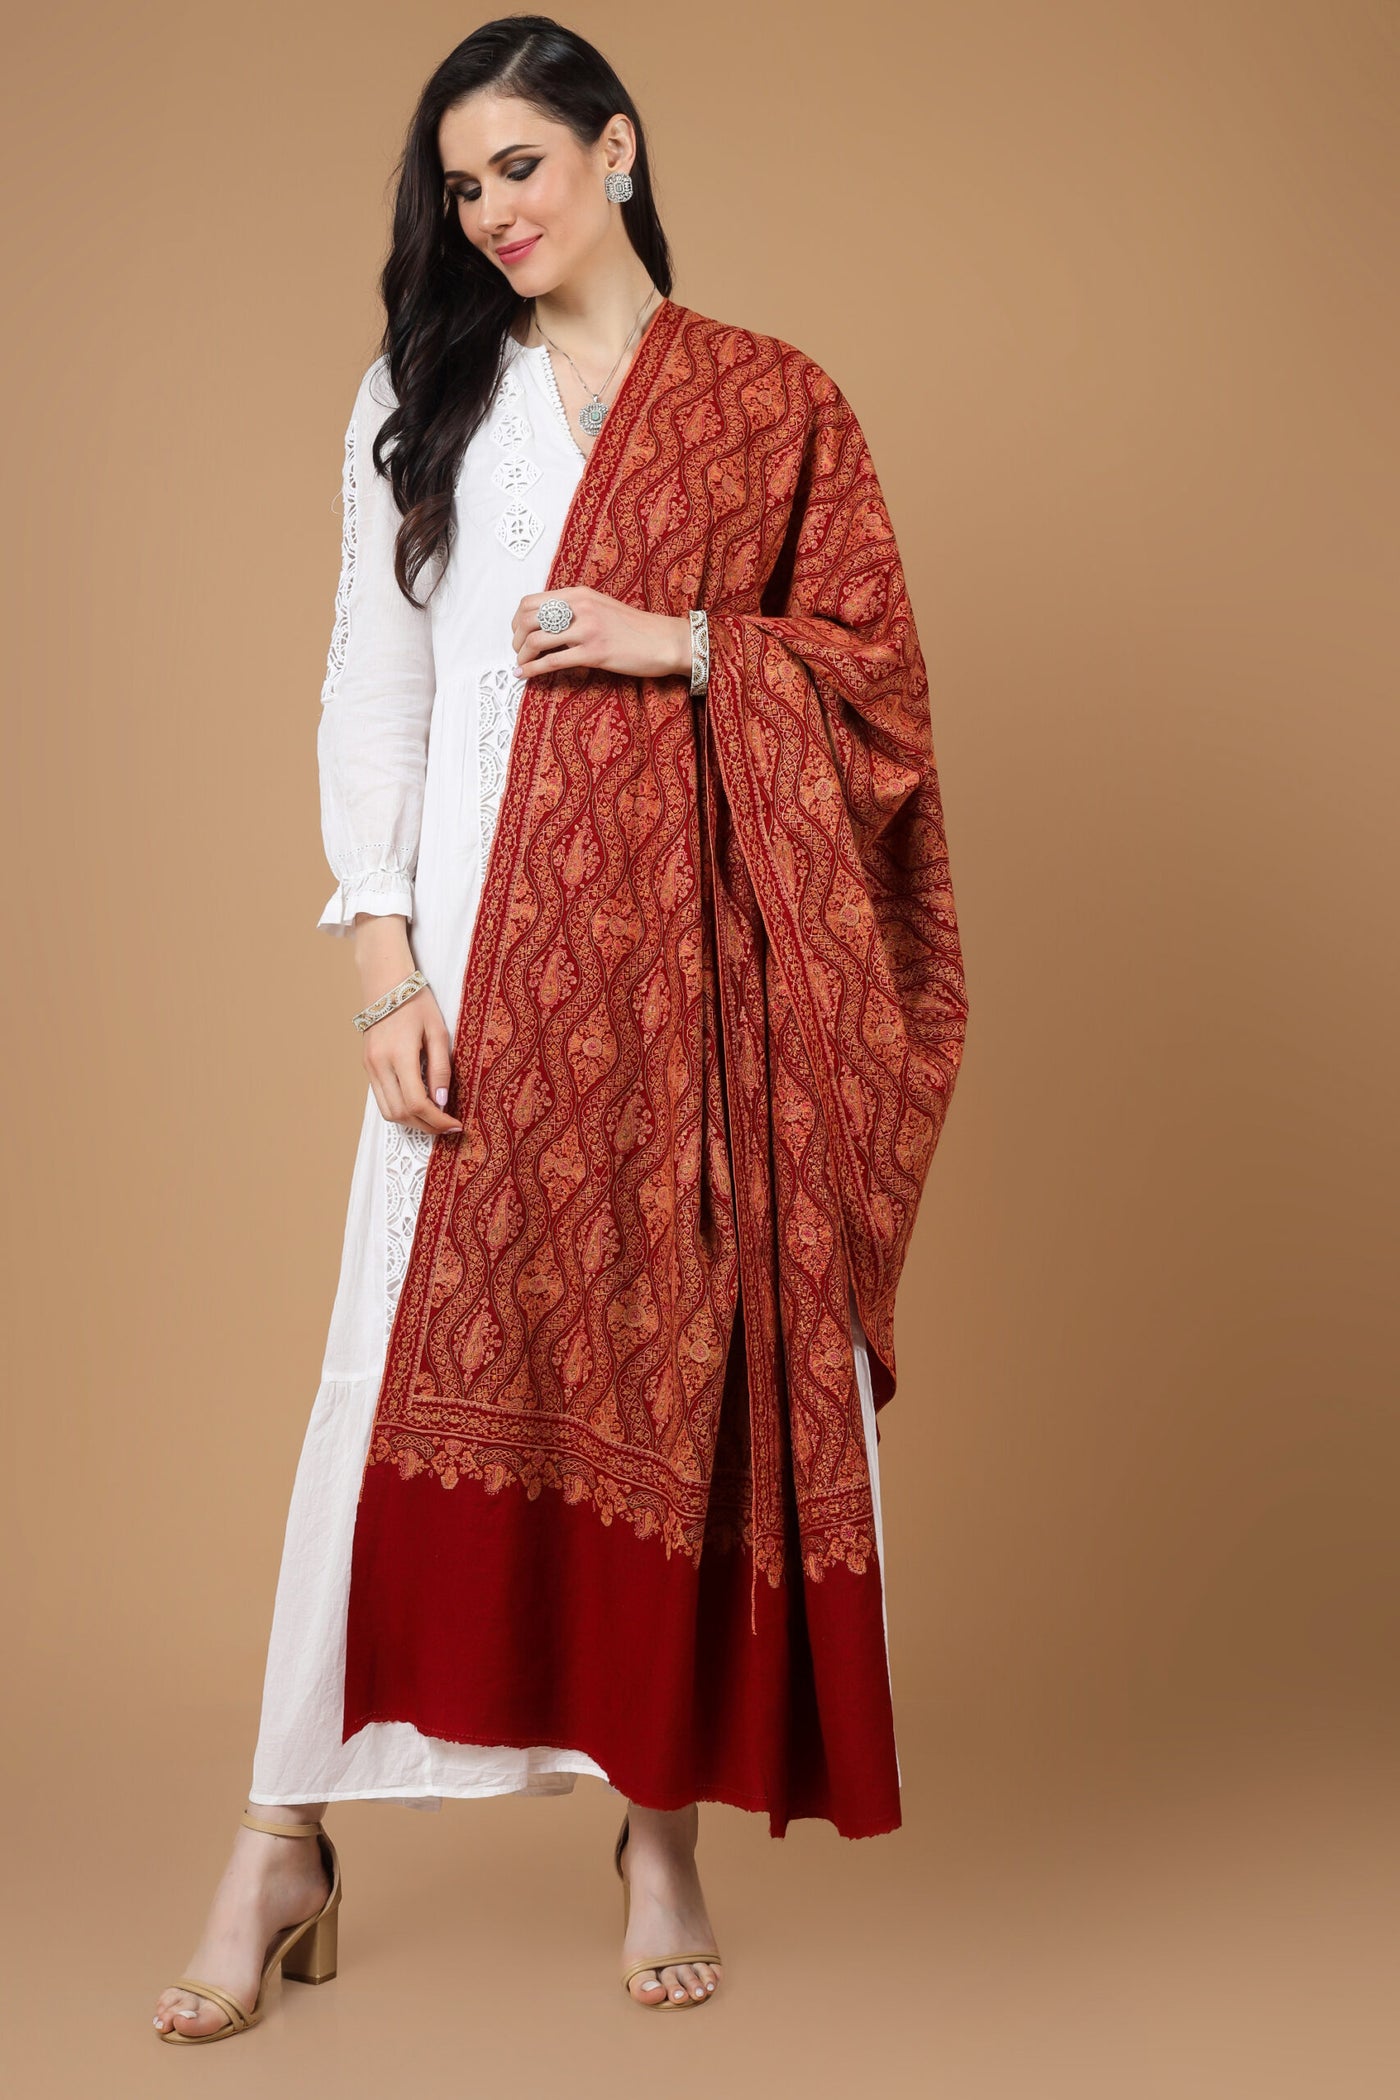 "PASHMINA SHAWL - A Statement of Elegance" bright Maroon colored Pashmina is featured by intricate Sozni across its surface. "PASHMINA SHAWLS IN  UAE - Middle Eastern Opulence and Grace" . "KEPRA PASHMINA SHAWLS - For Those Who Seek Perfection"